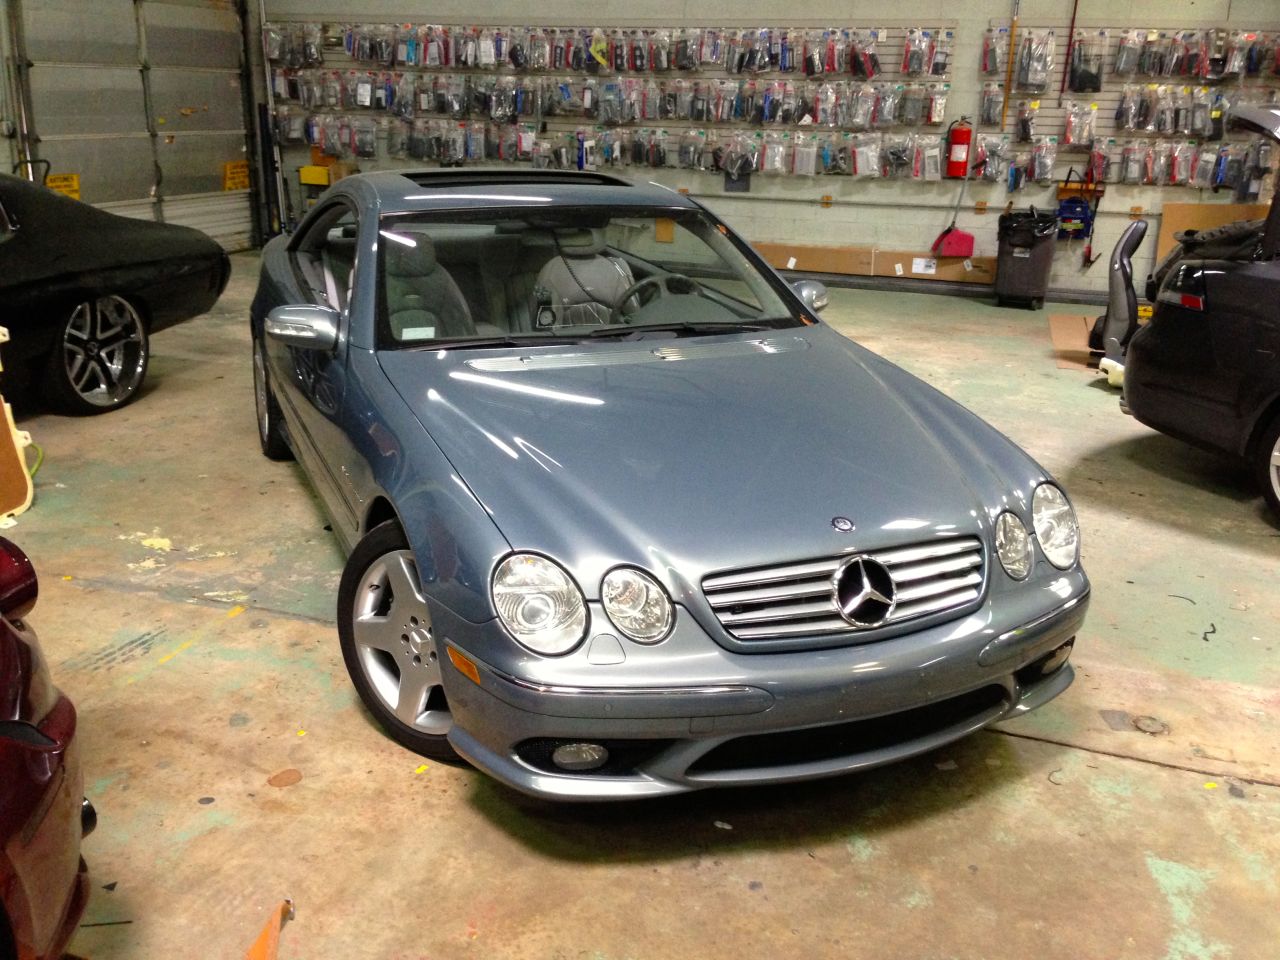 Bolian chose a Mercedes-Benz CL55 AMG for the dash. It offered a combination of gas mileage and performance the team needed to break the record. 